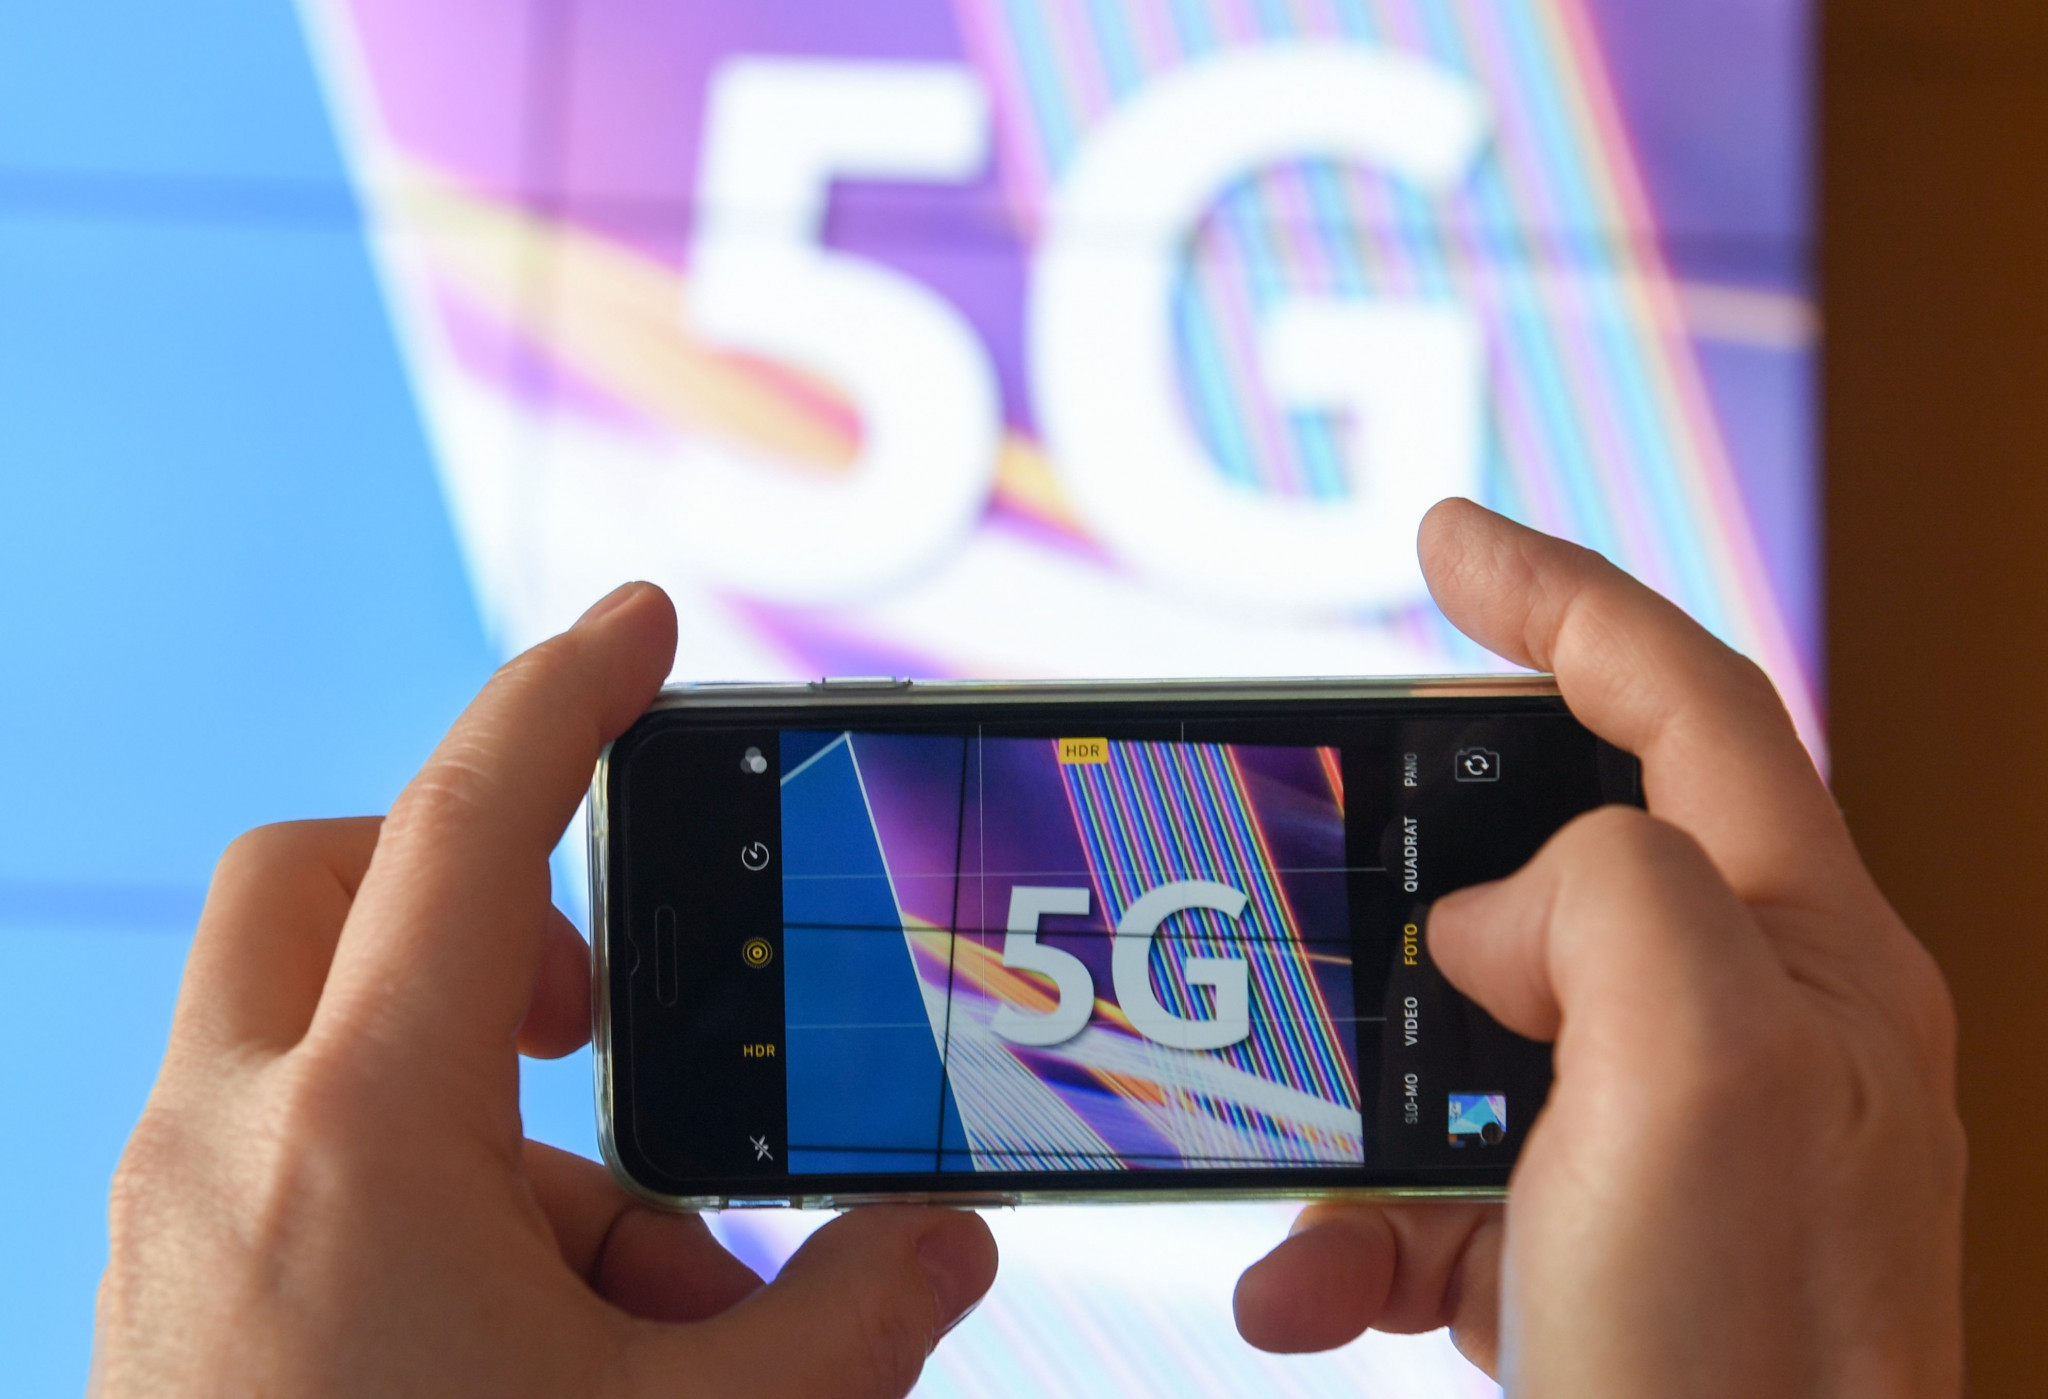 Hopes high as Beijing launches multi-billion dollar plan to build 5G network in time for 2022 Winter Olympics